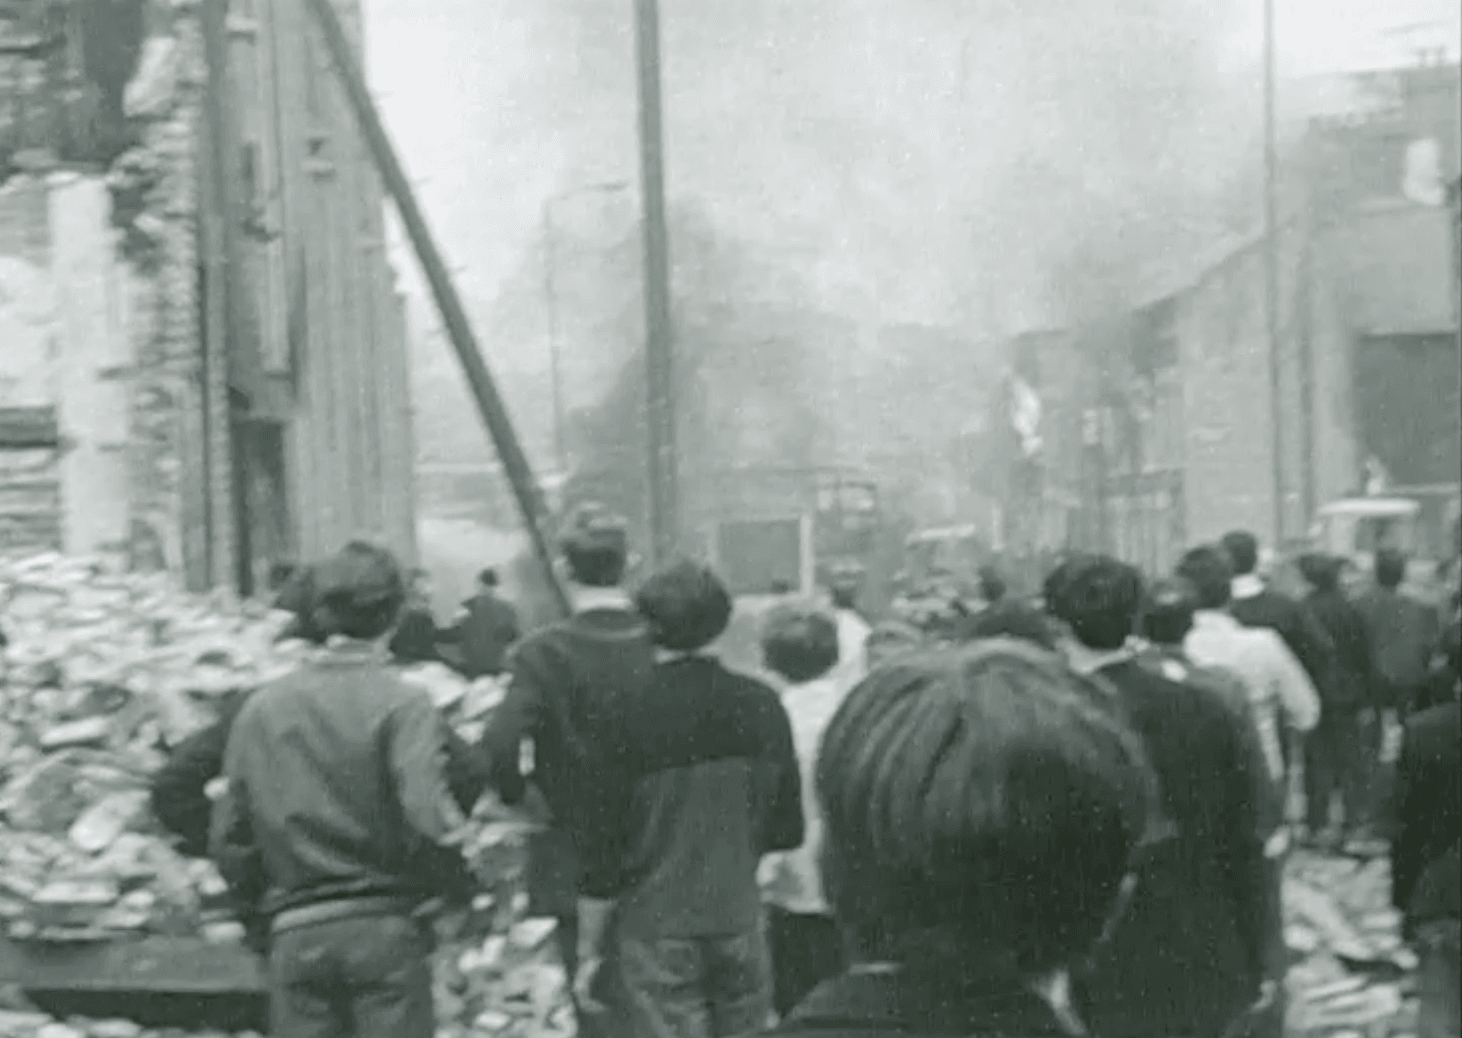 HISTORY TELLERS: Chaos reigns in Divis Street, August 1969